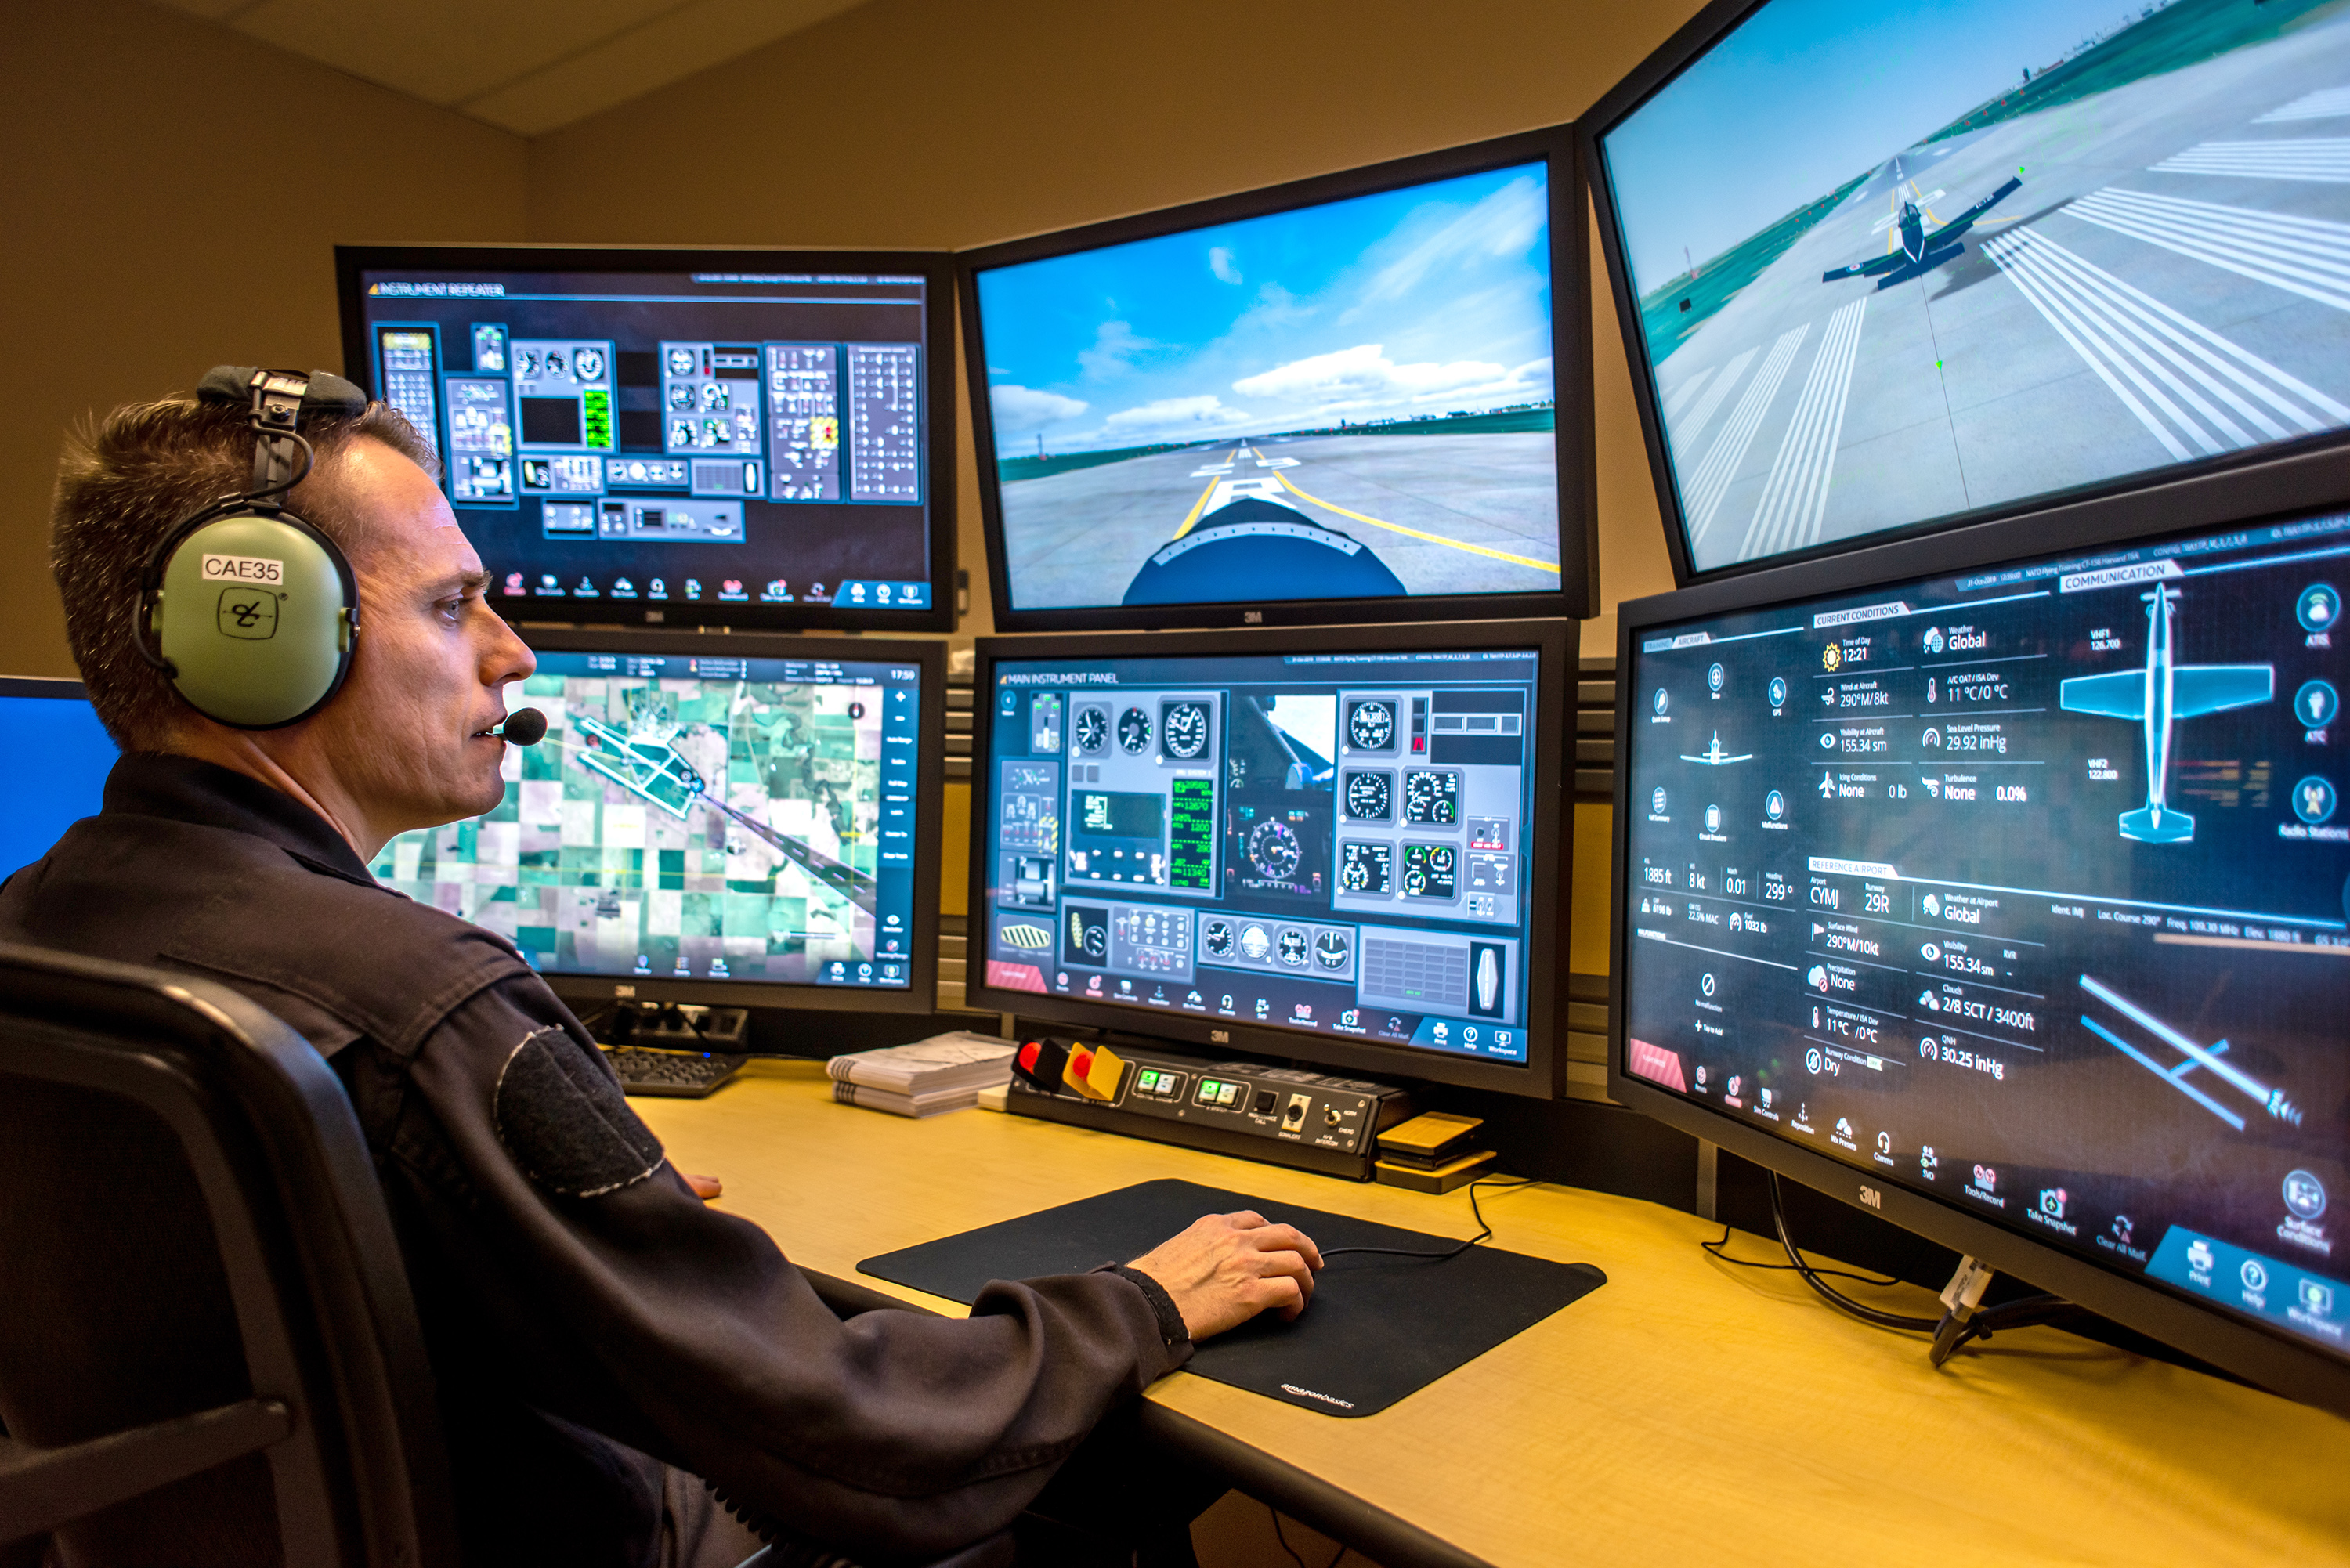 New Remote Instructor Station for 1-on-1 Flight Sim Training